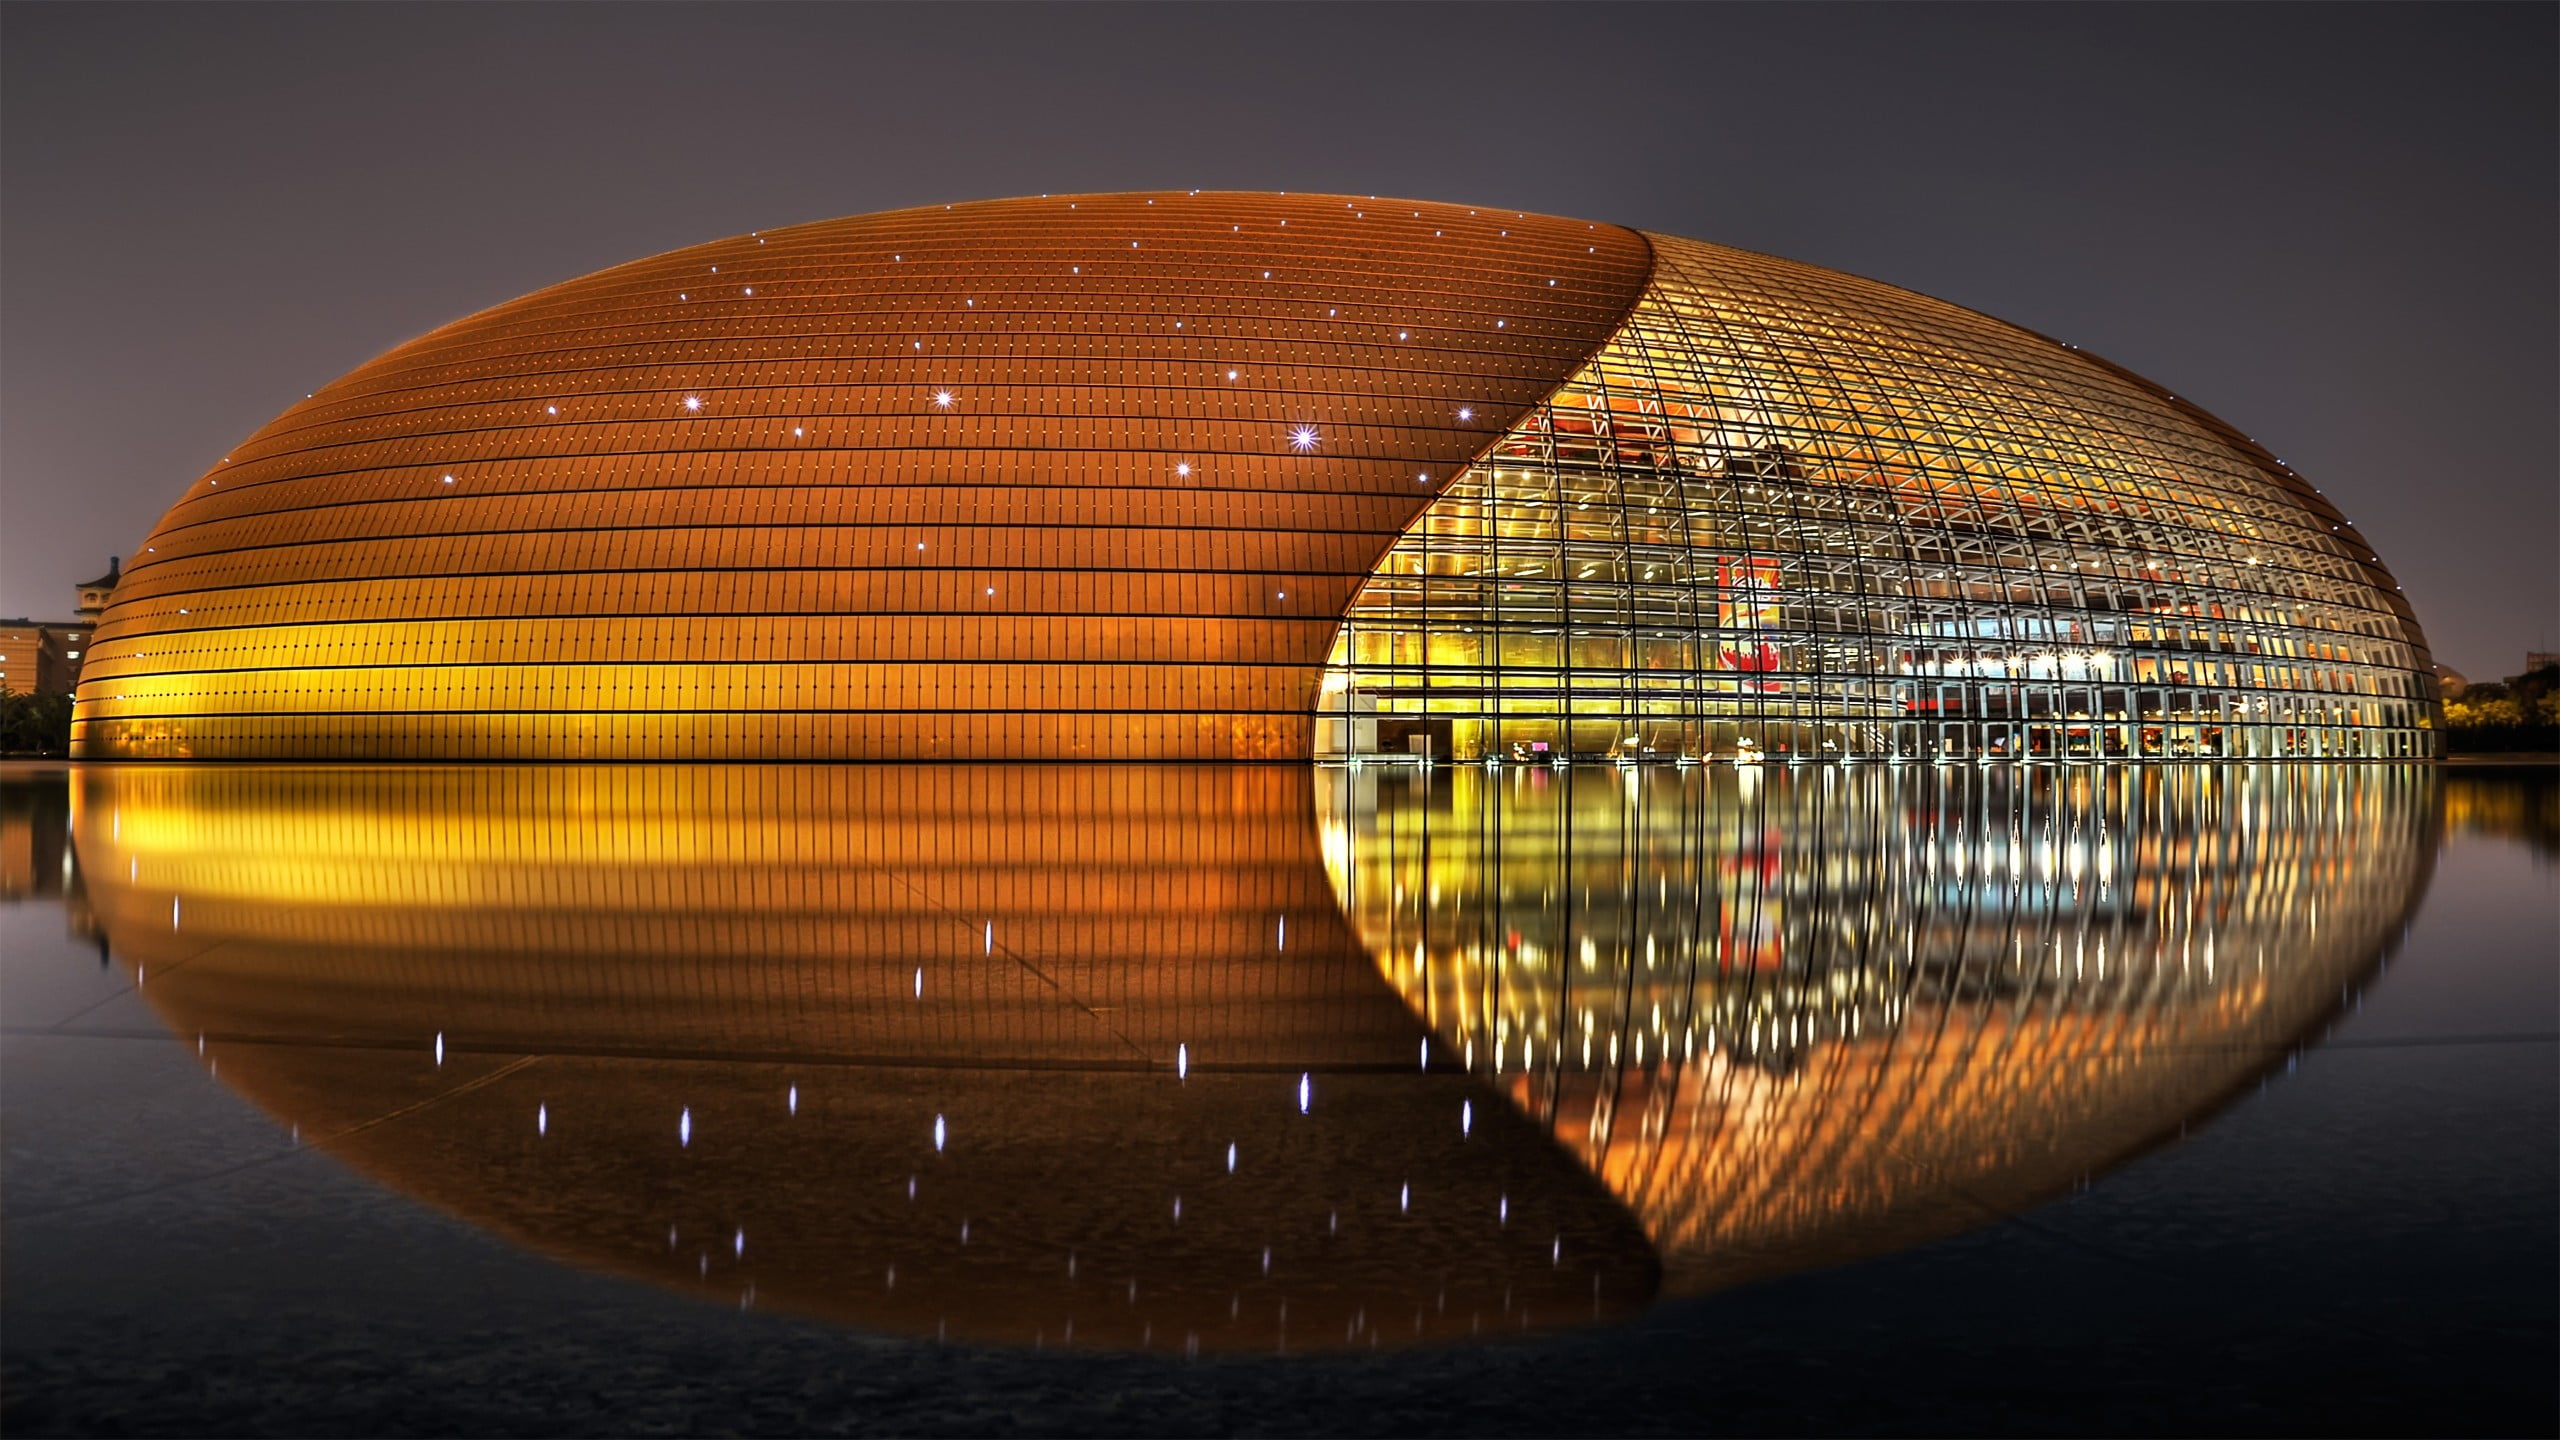 brown and gray glass building museum, architecture, modern, stadium, China